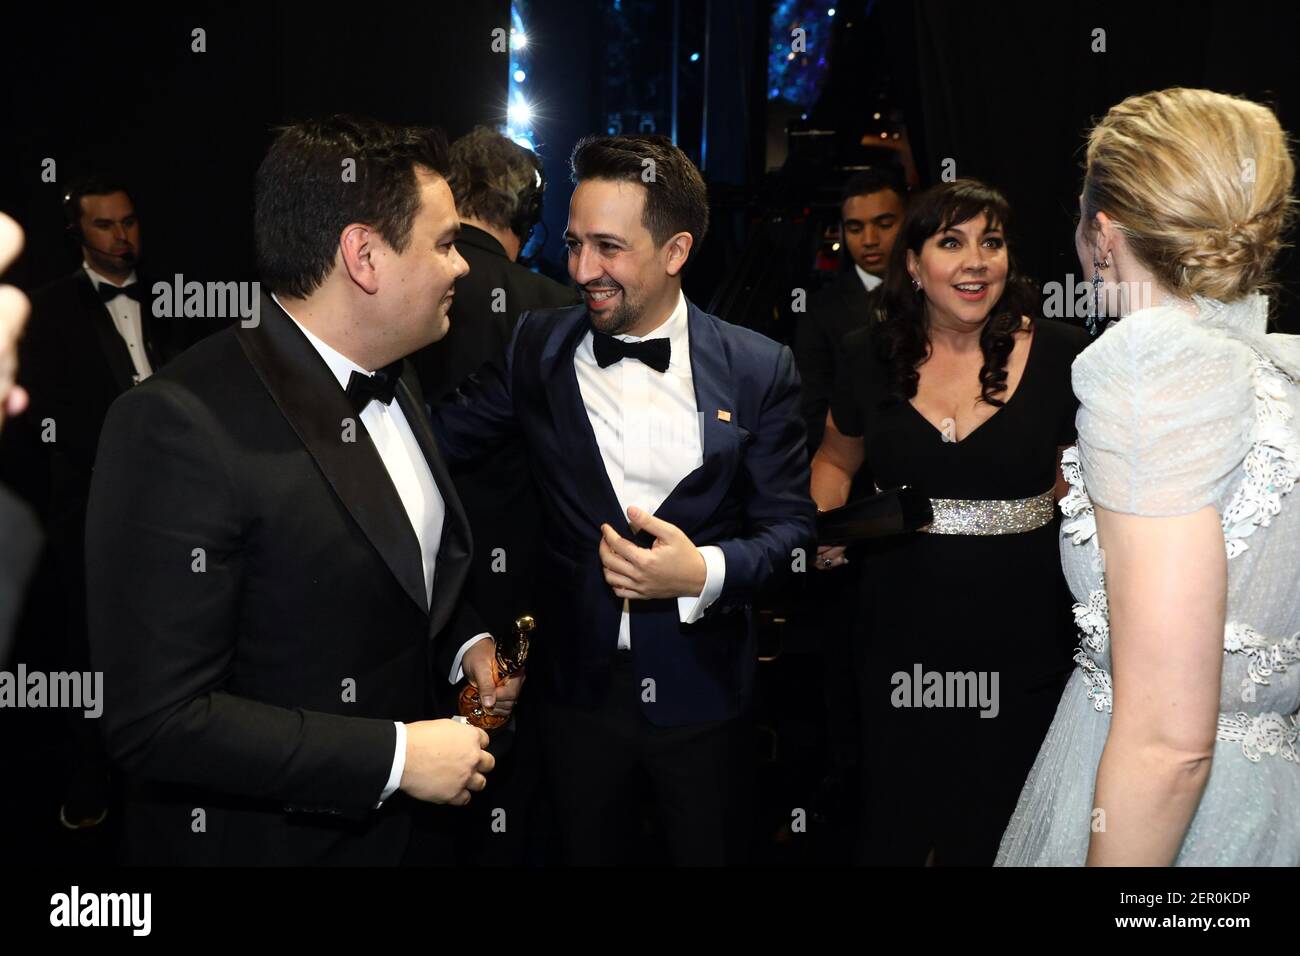 March 4, 2018; Hollywood, CA, USA; (L-R) Robert Lopez, Lin-Maneul Miranda, Kristen Anderson-Lopez and Emily Blunt backstage during the 90th Academy Awards at Dolby Theatre. Mandatory Credit: Handout Photo by A.M.P.A.S. via USA TODAY NETWORK/Sipa USA Stock Photo